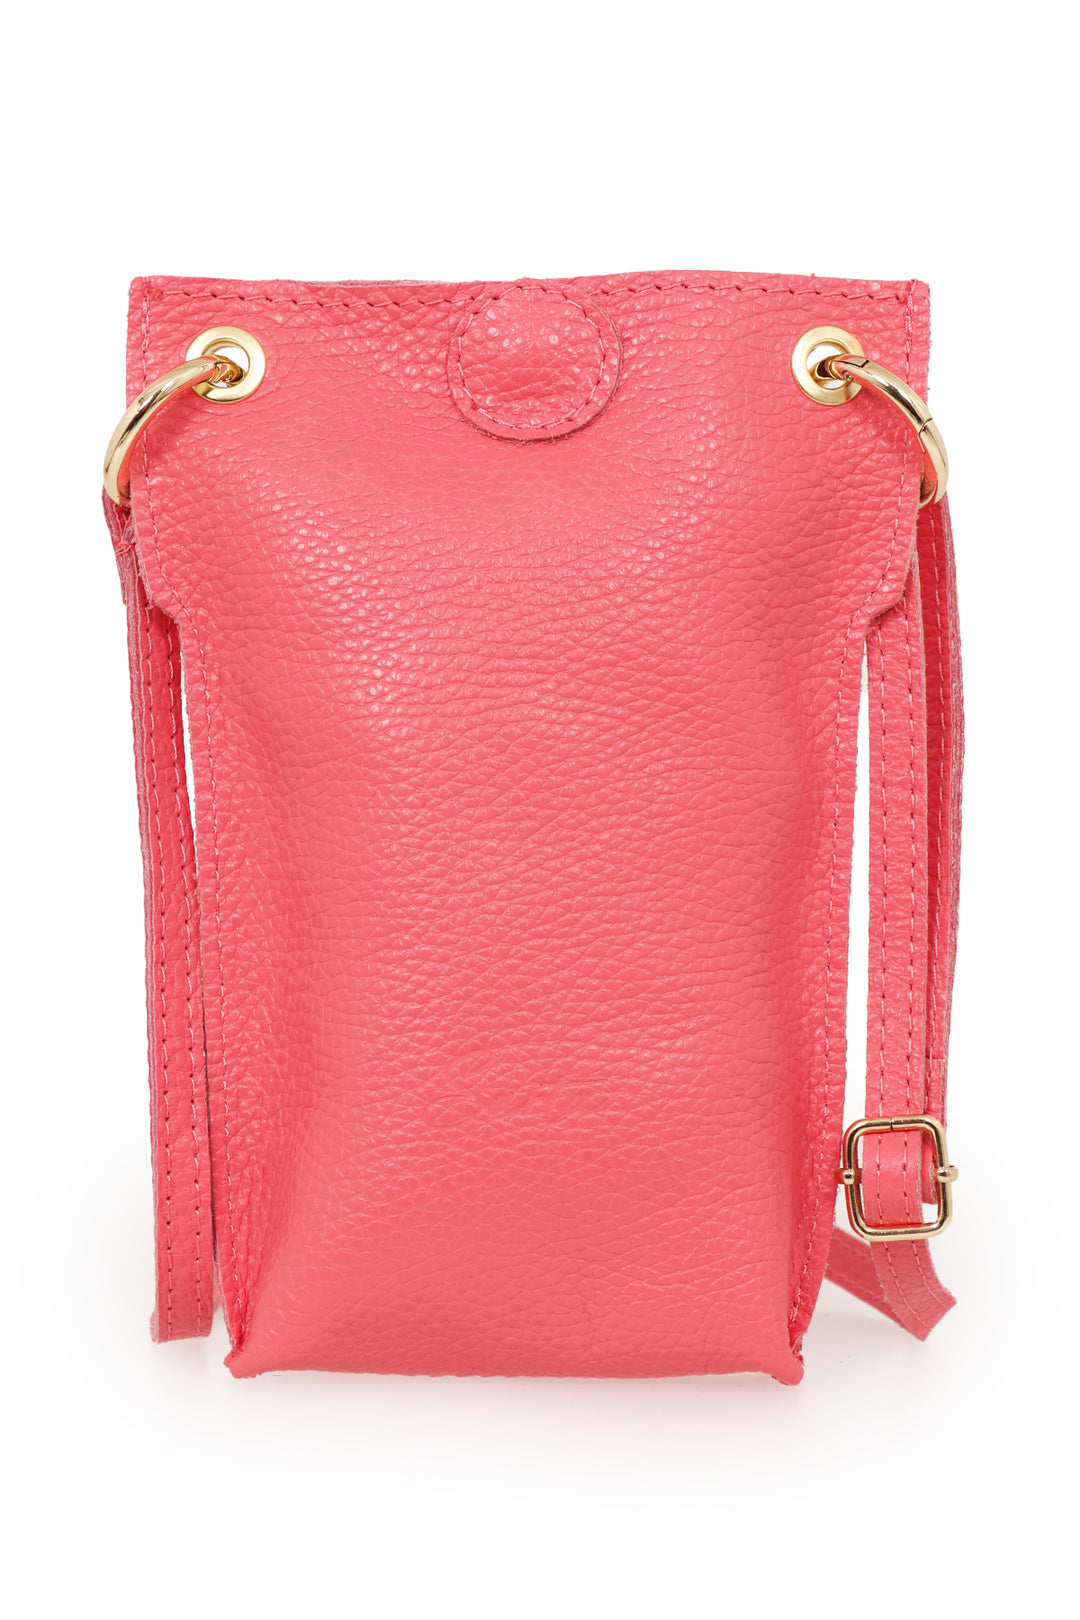 Coral Genuine Italian Leather Crossbody Phone Pouch